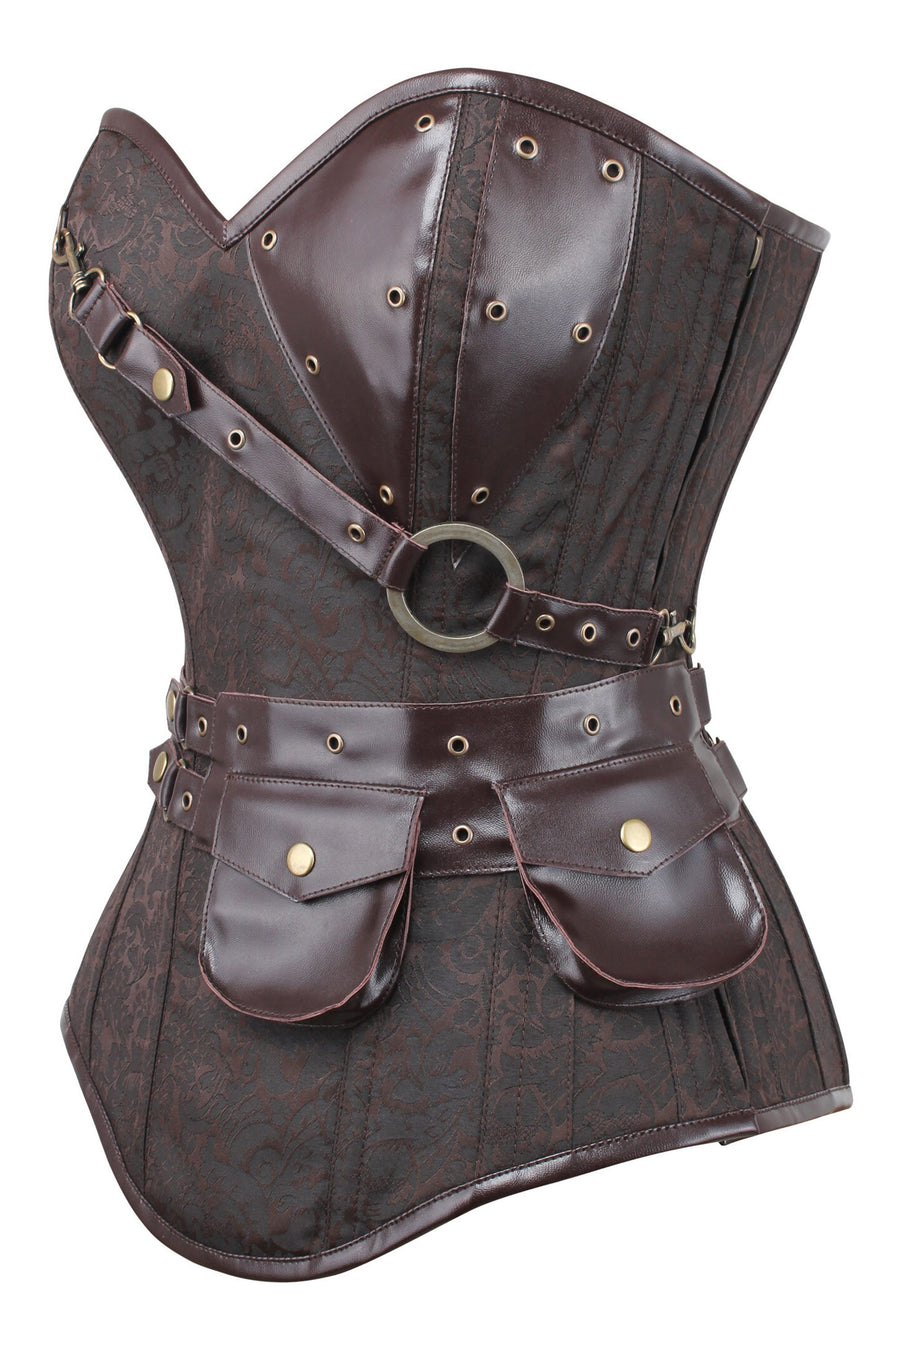 3 Pc Steampunk Victorian Brown Corset & Double Bustle, Long Brown, Short  Black Skirts, Costume, Cosplay Goth Clothes Clothing Halloween 